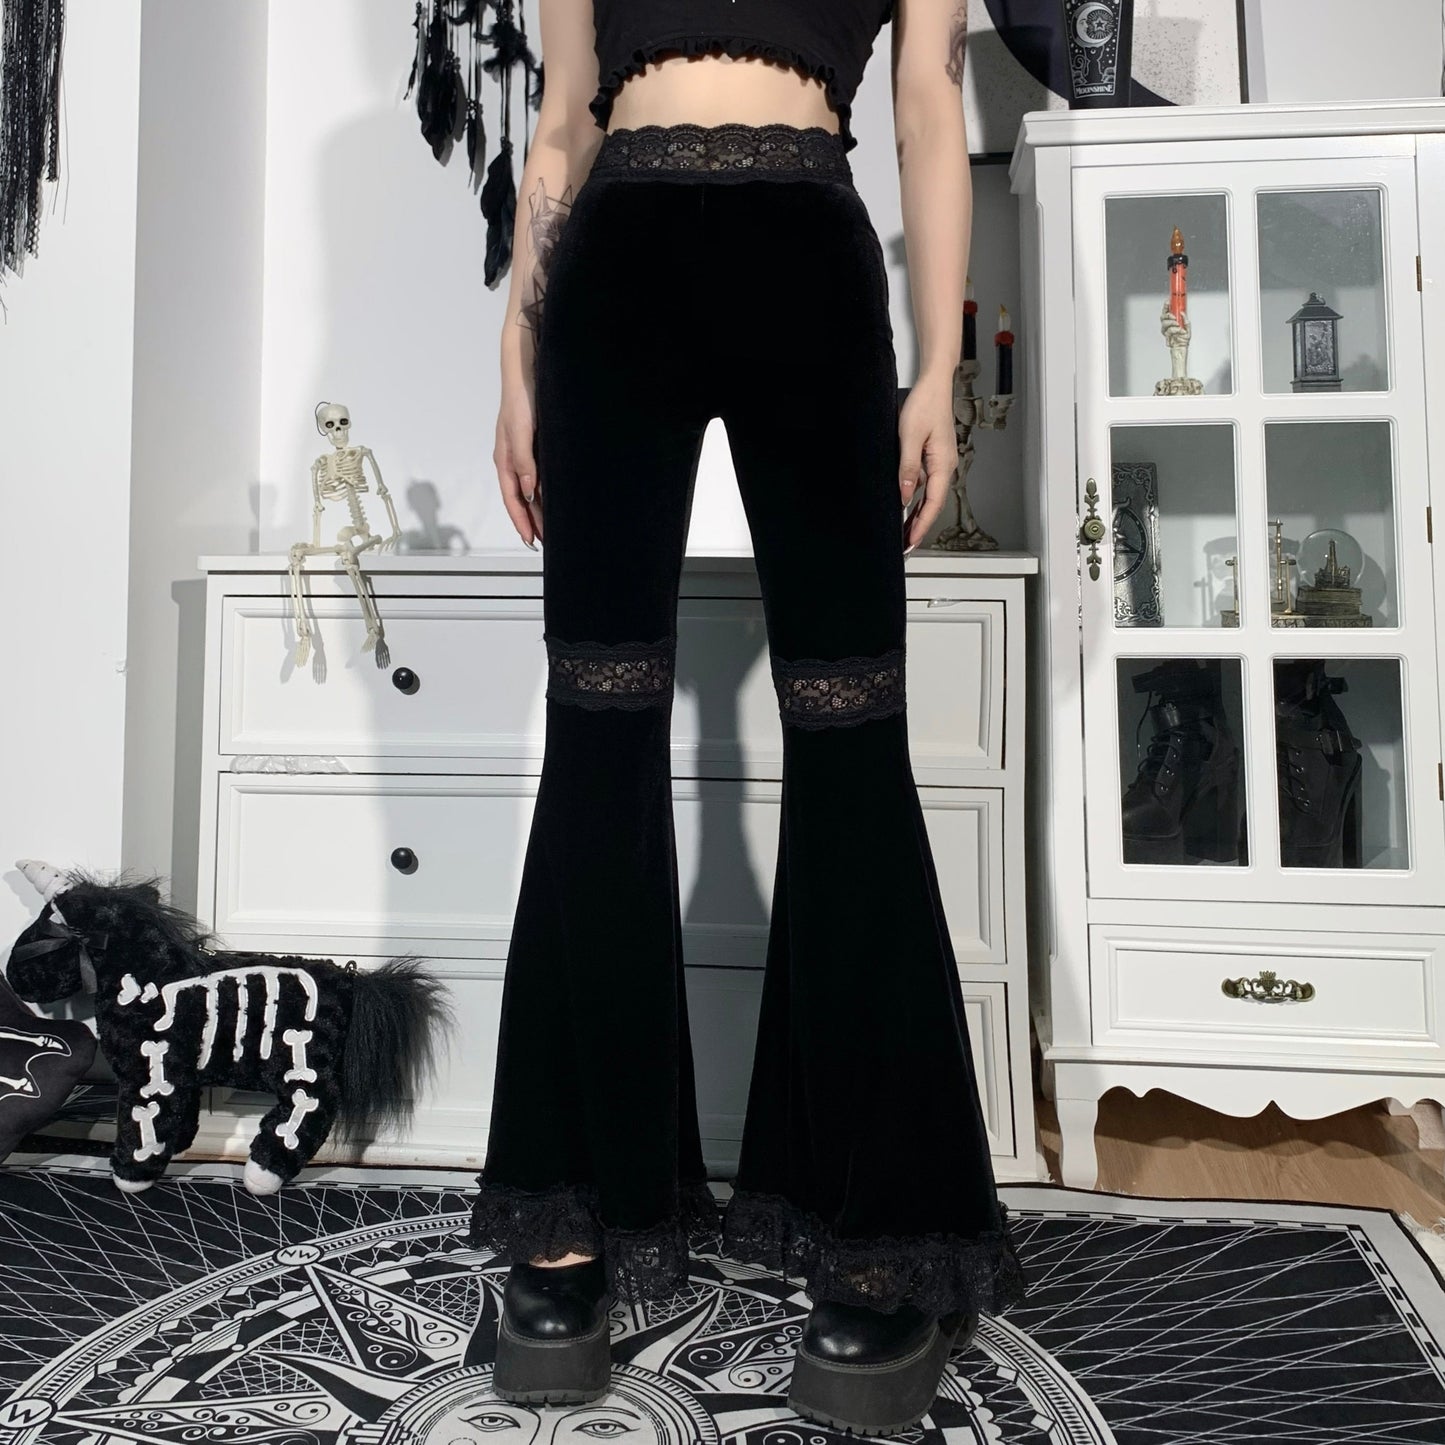 Witchy Clothing Goth High Waist Flared Pants Gothic Clothing